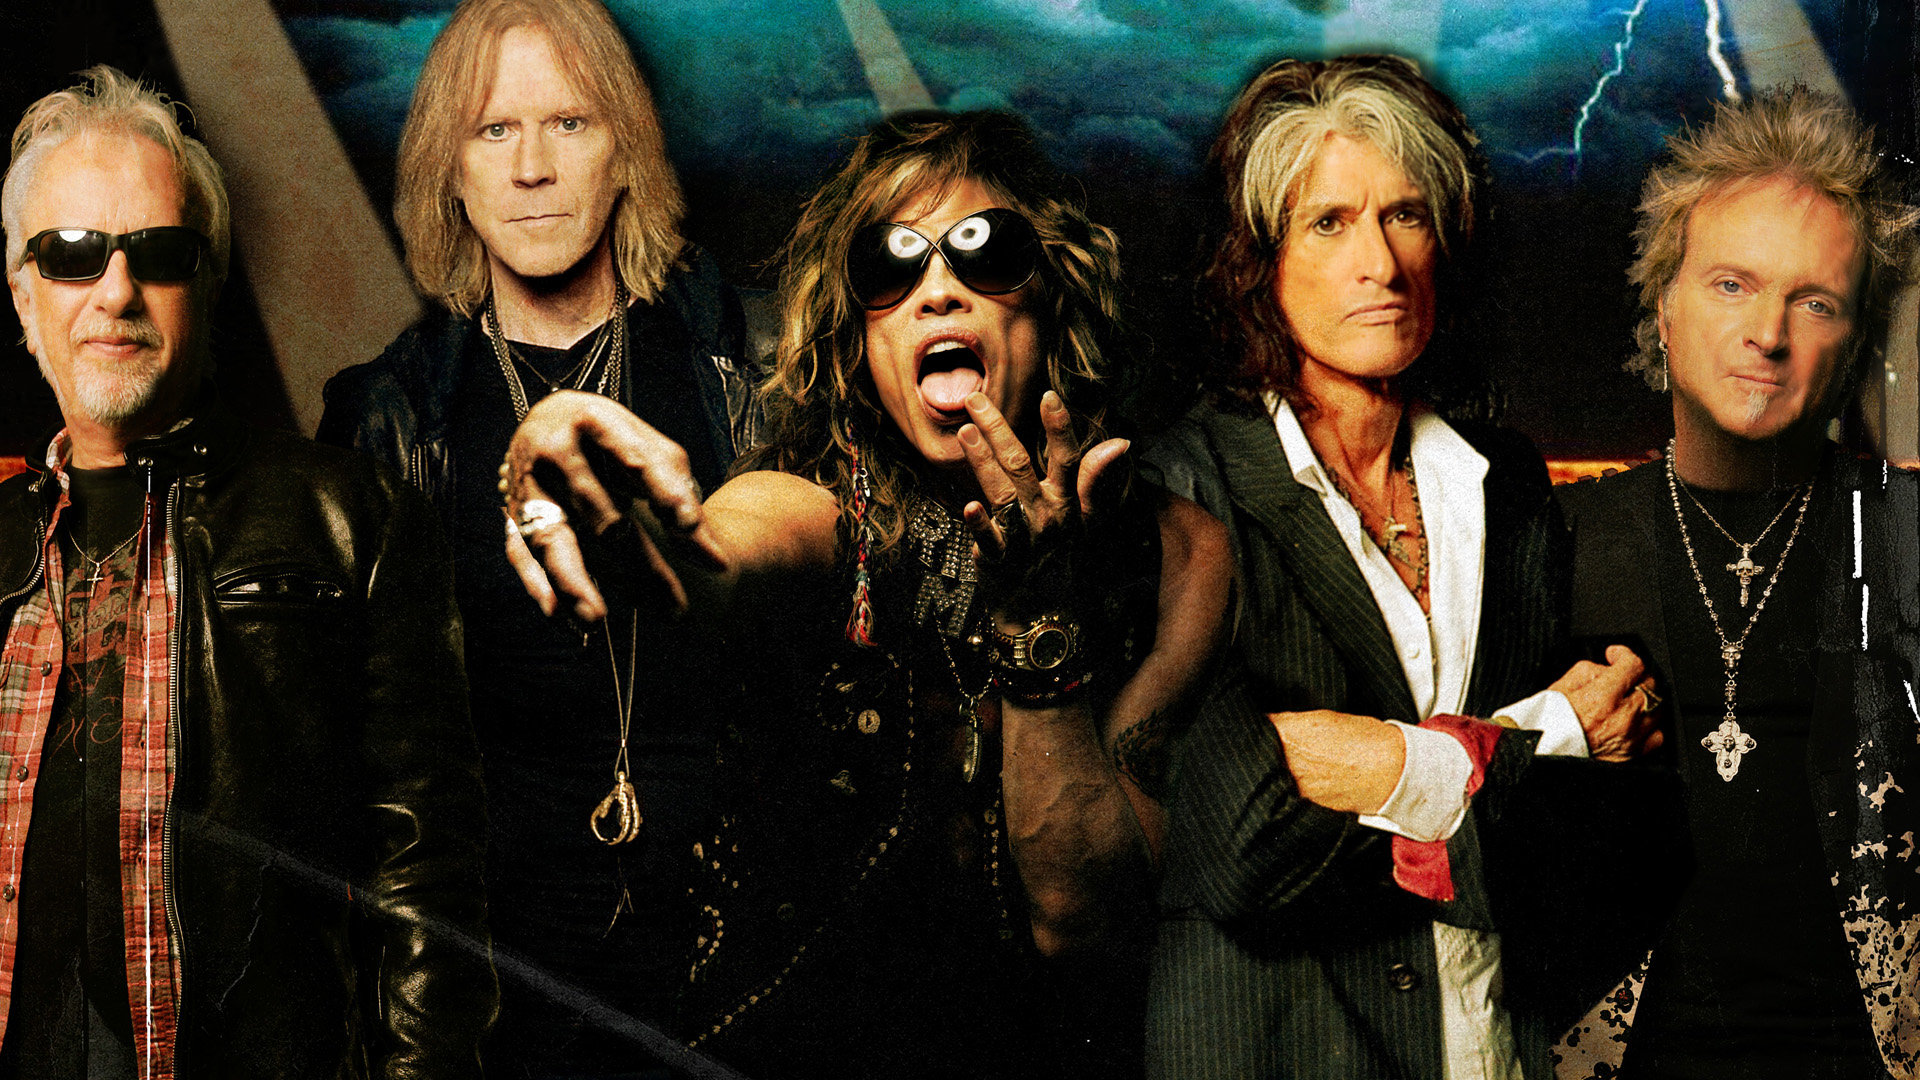 Download 1080p Aerosmith PC wallpaper ID:97089 for free